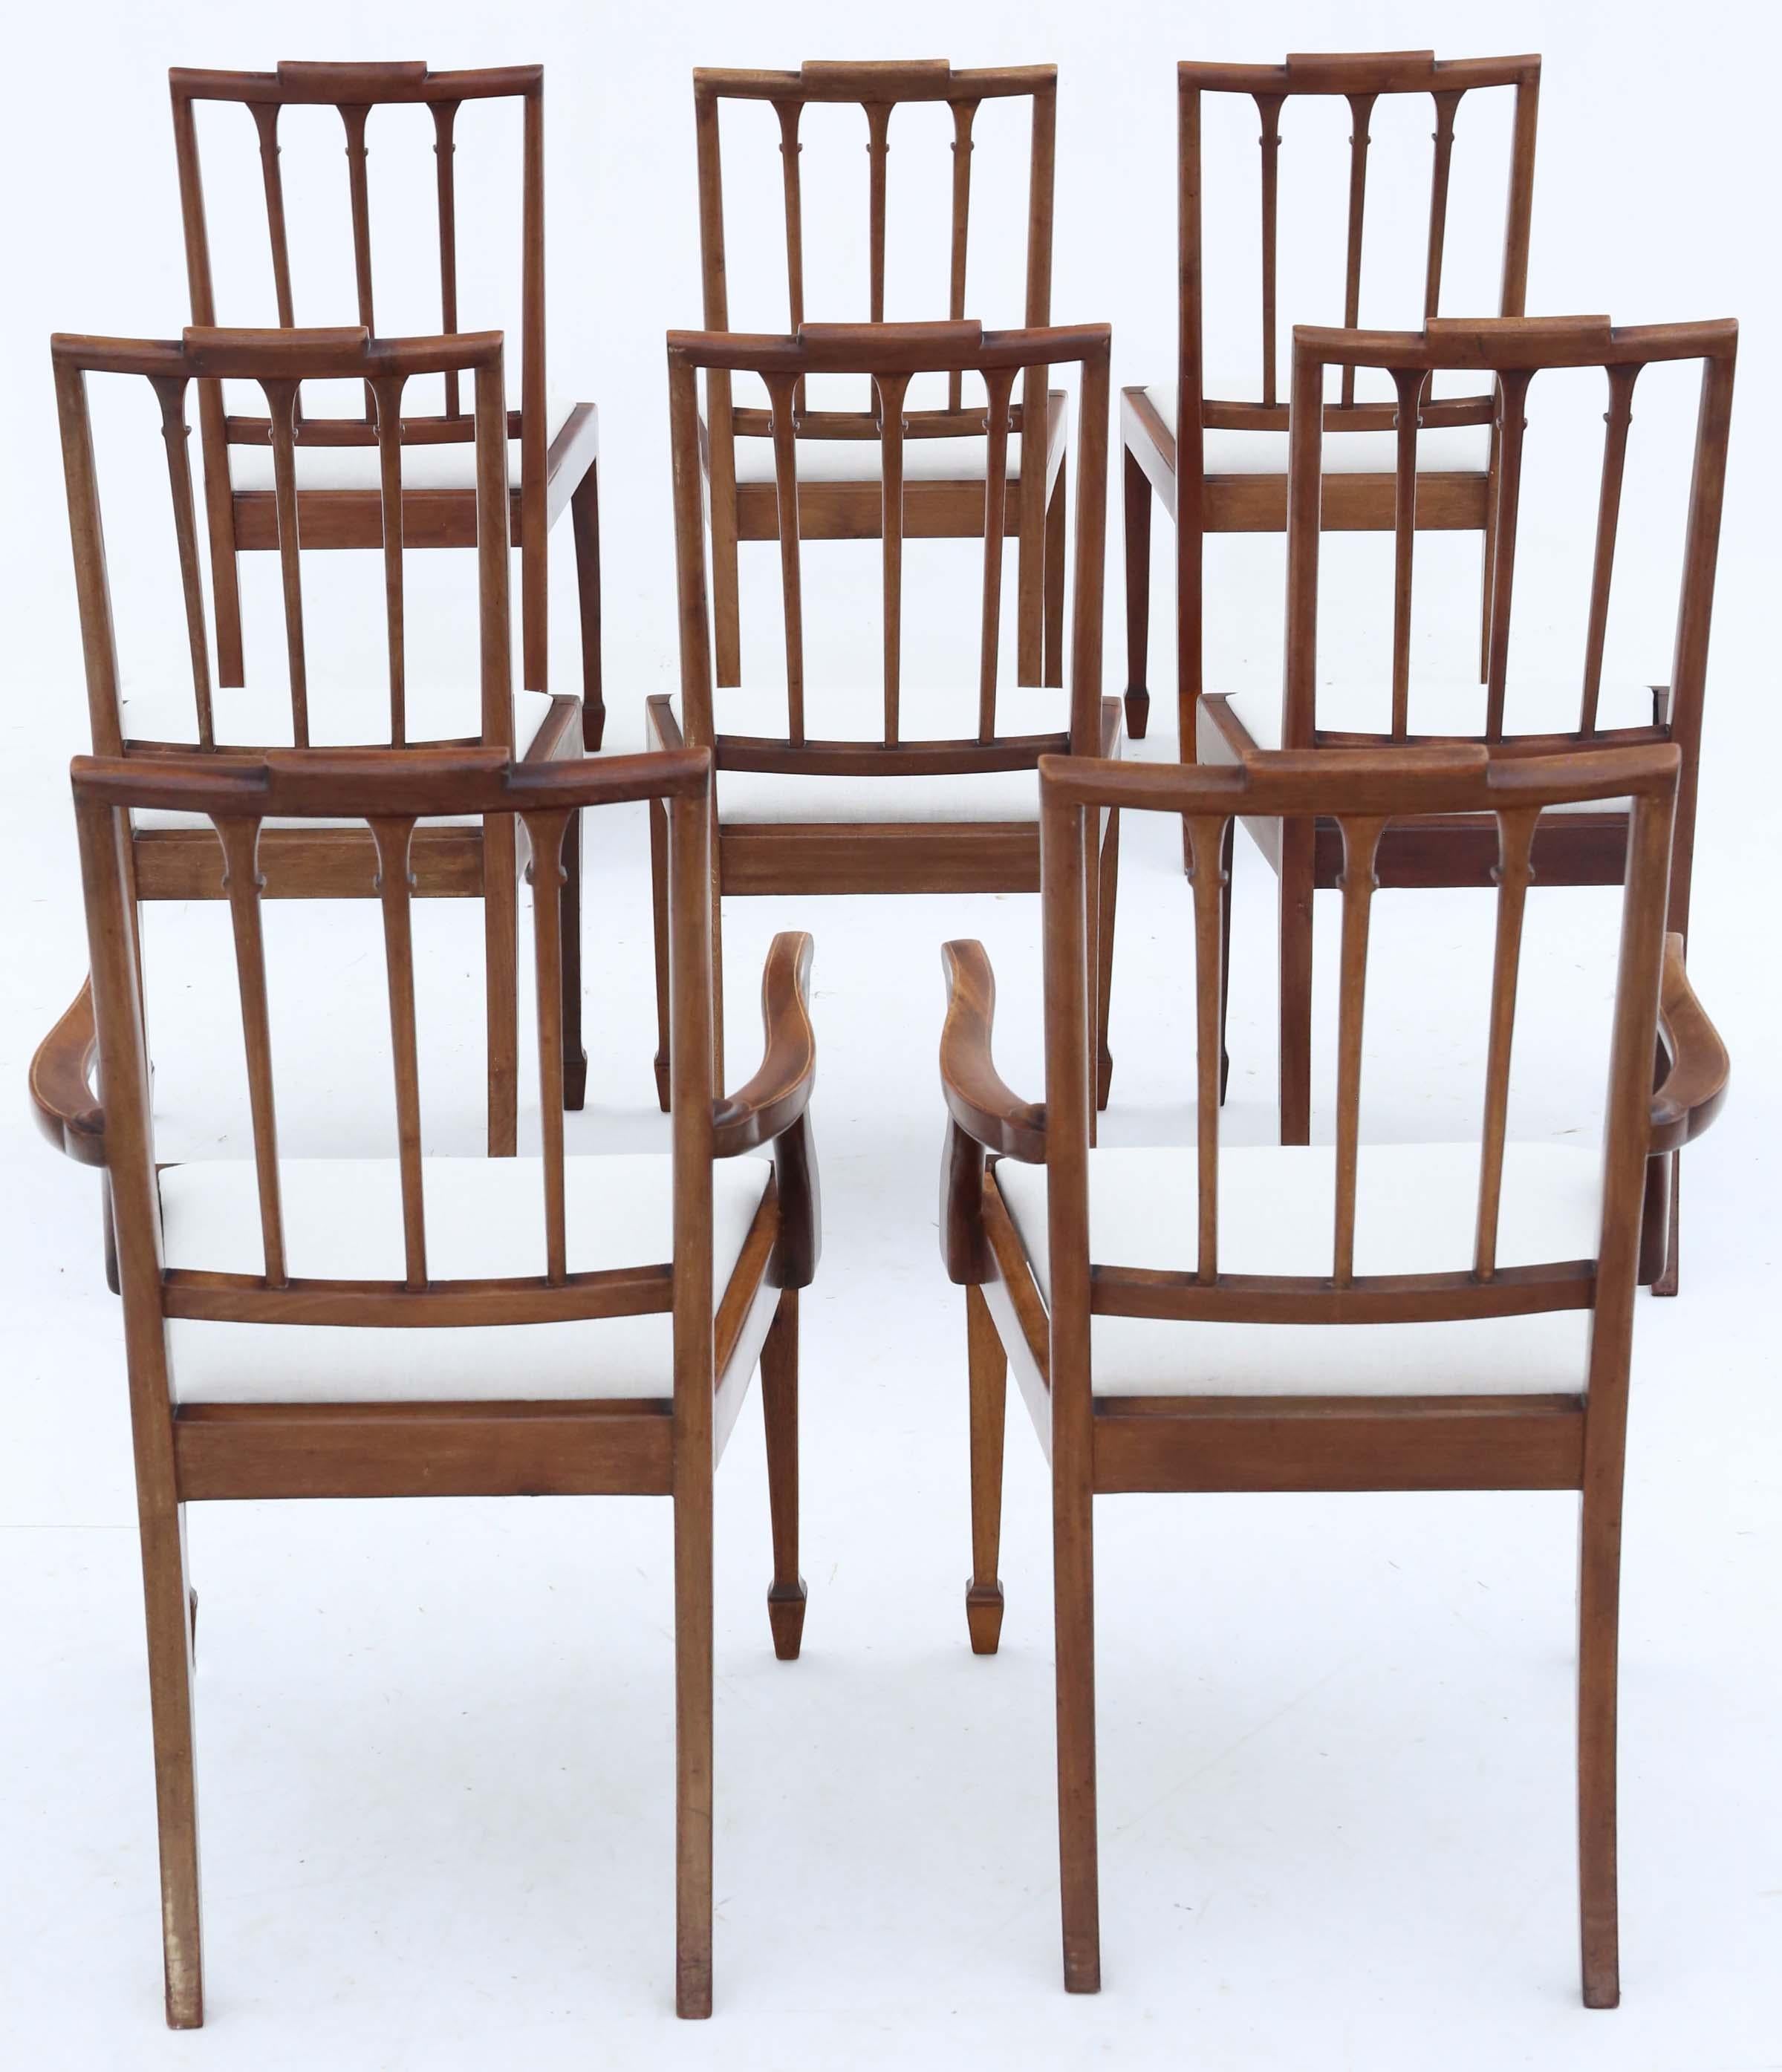 Discover the timeless charm of this exquisite set of 8 (6 + 2) Georgian revival mahogany dining chairs, crafted around the turn of the 20th century, circa 1900. These chairs encapsulate the elegance of the Georgian era with their fine craftsmanship